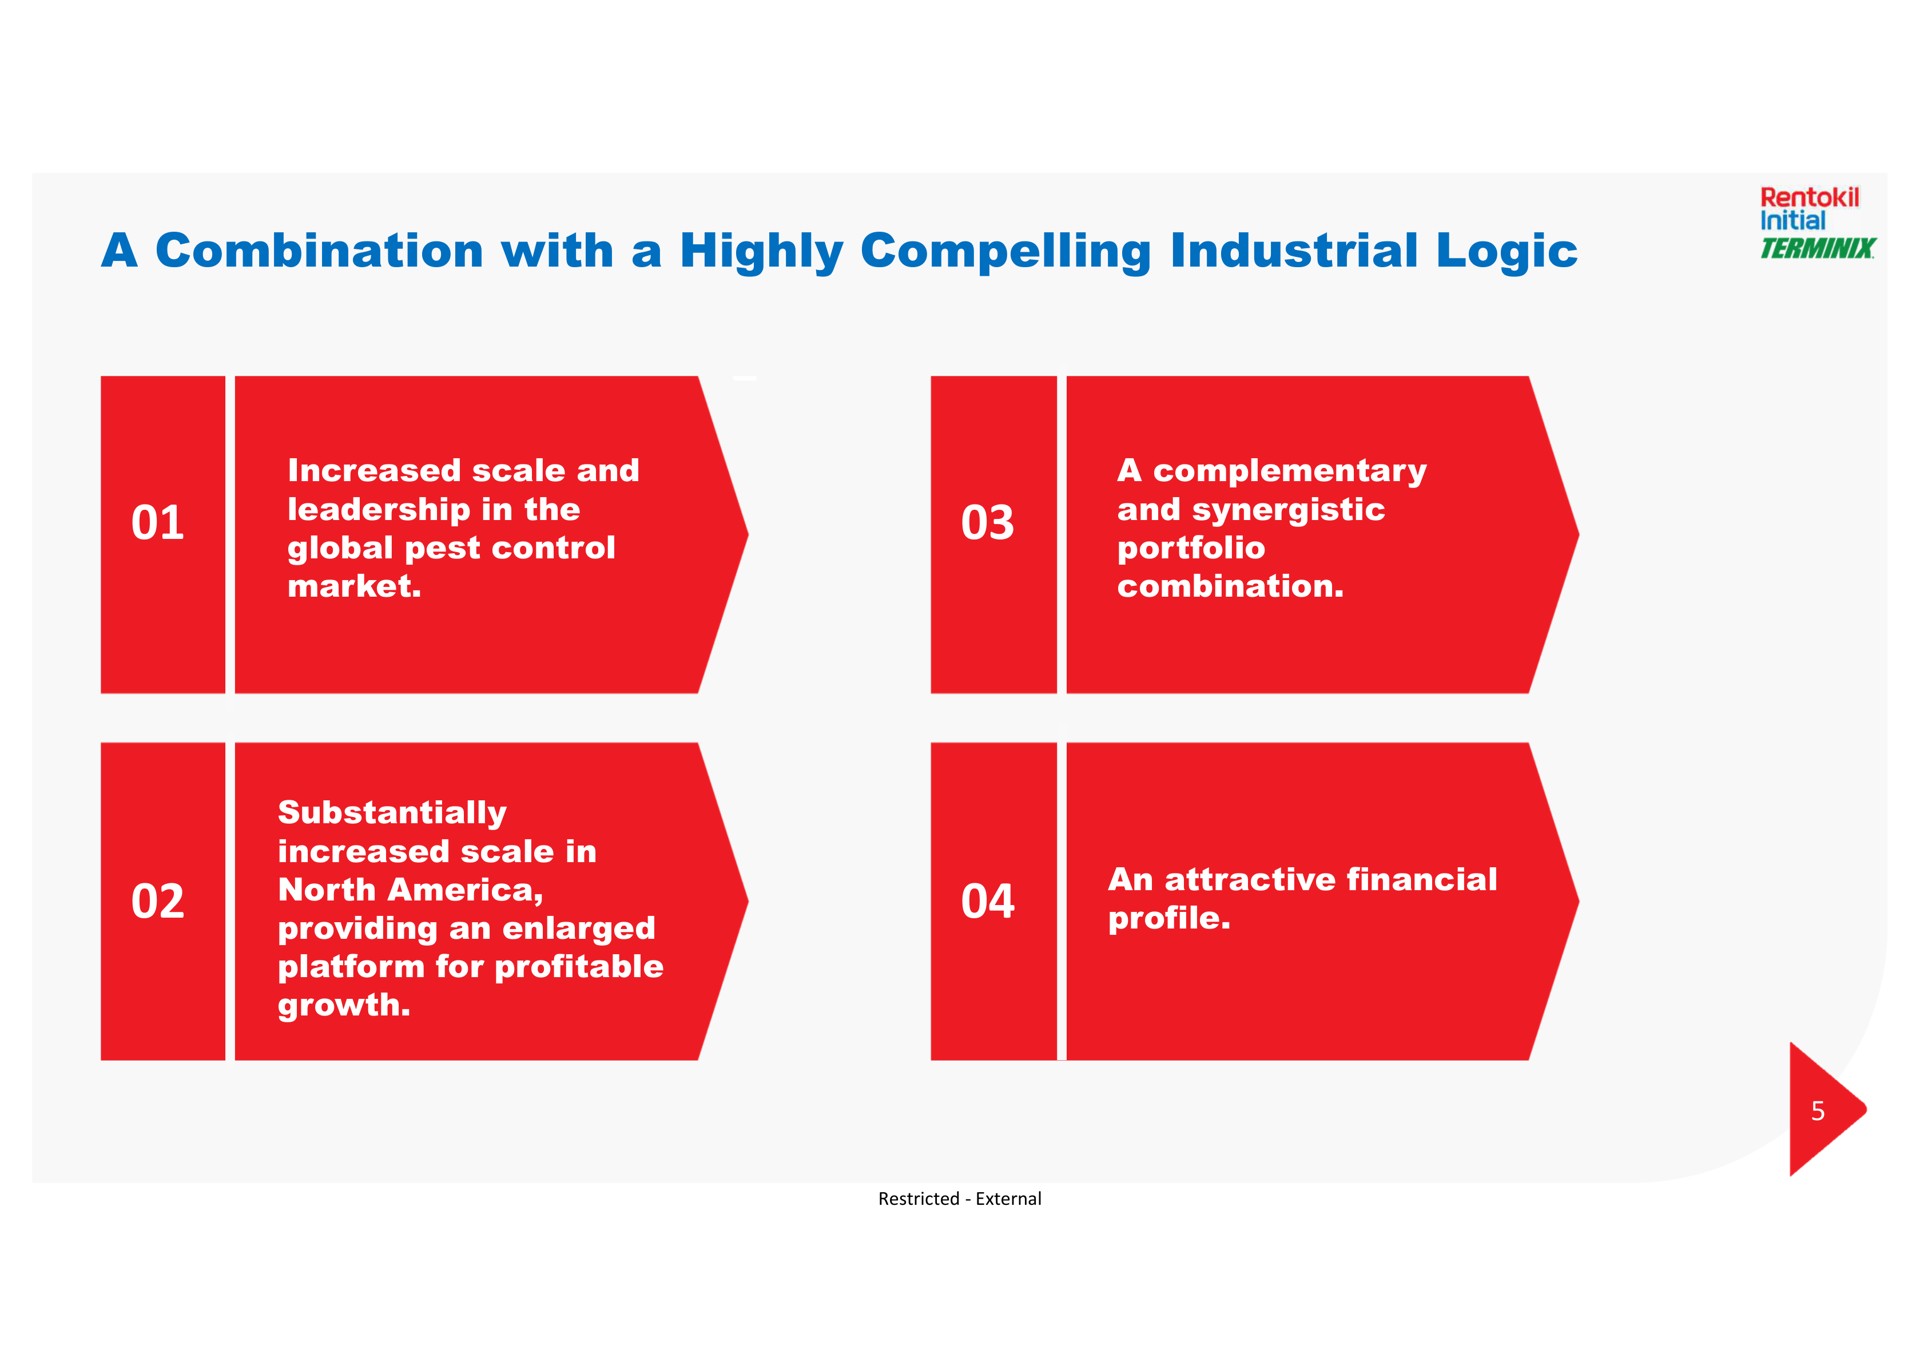 a combination with a highly compelling industrial logic | Rentokil Initial